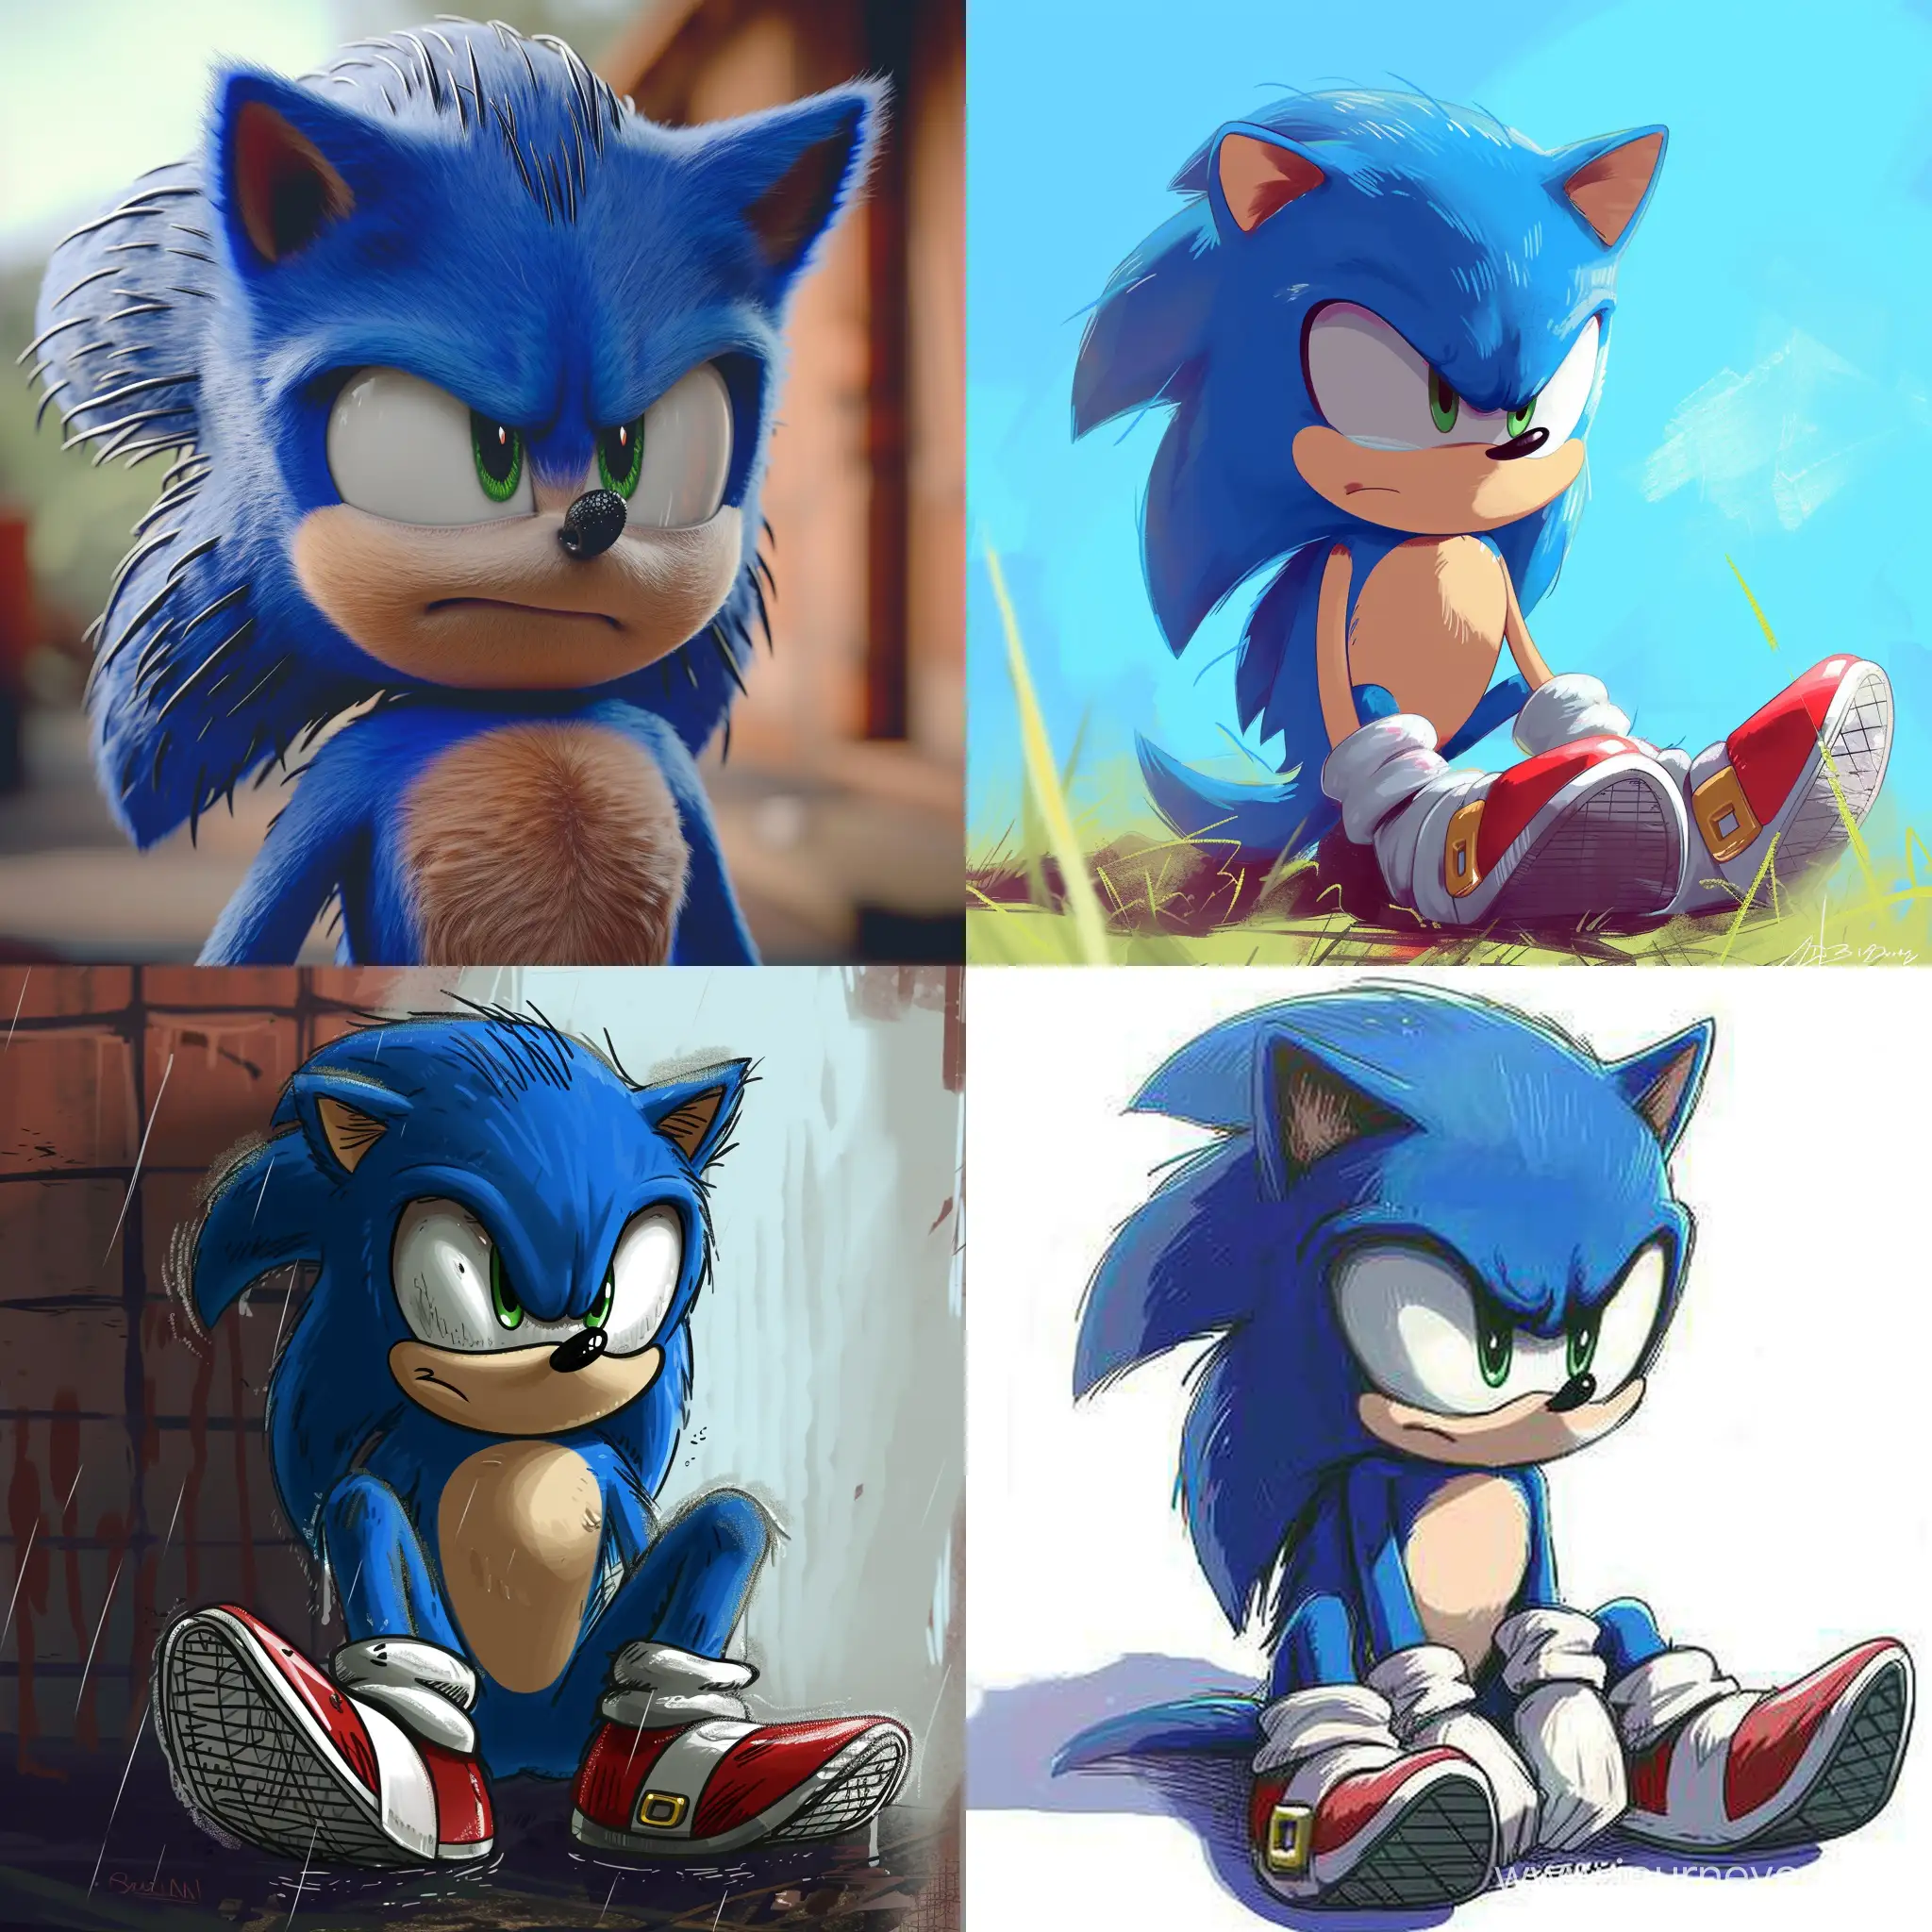 Sonics-Lonely-Laughter-A-Glimpse-into-the-Blue-Heros-Hidden-Emotions